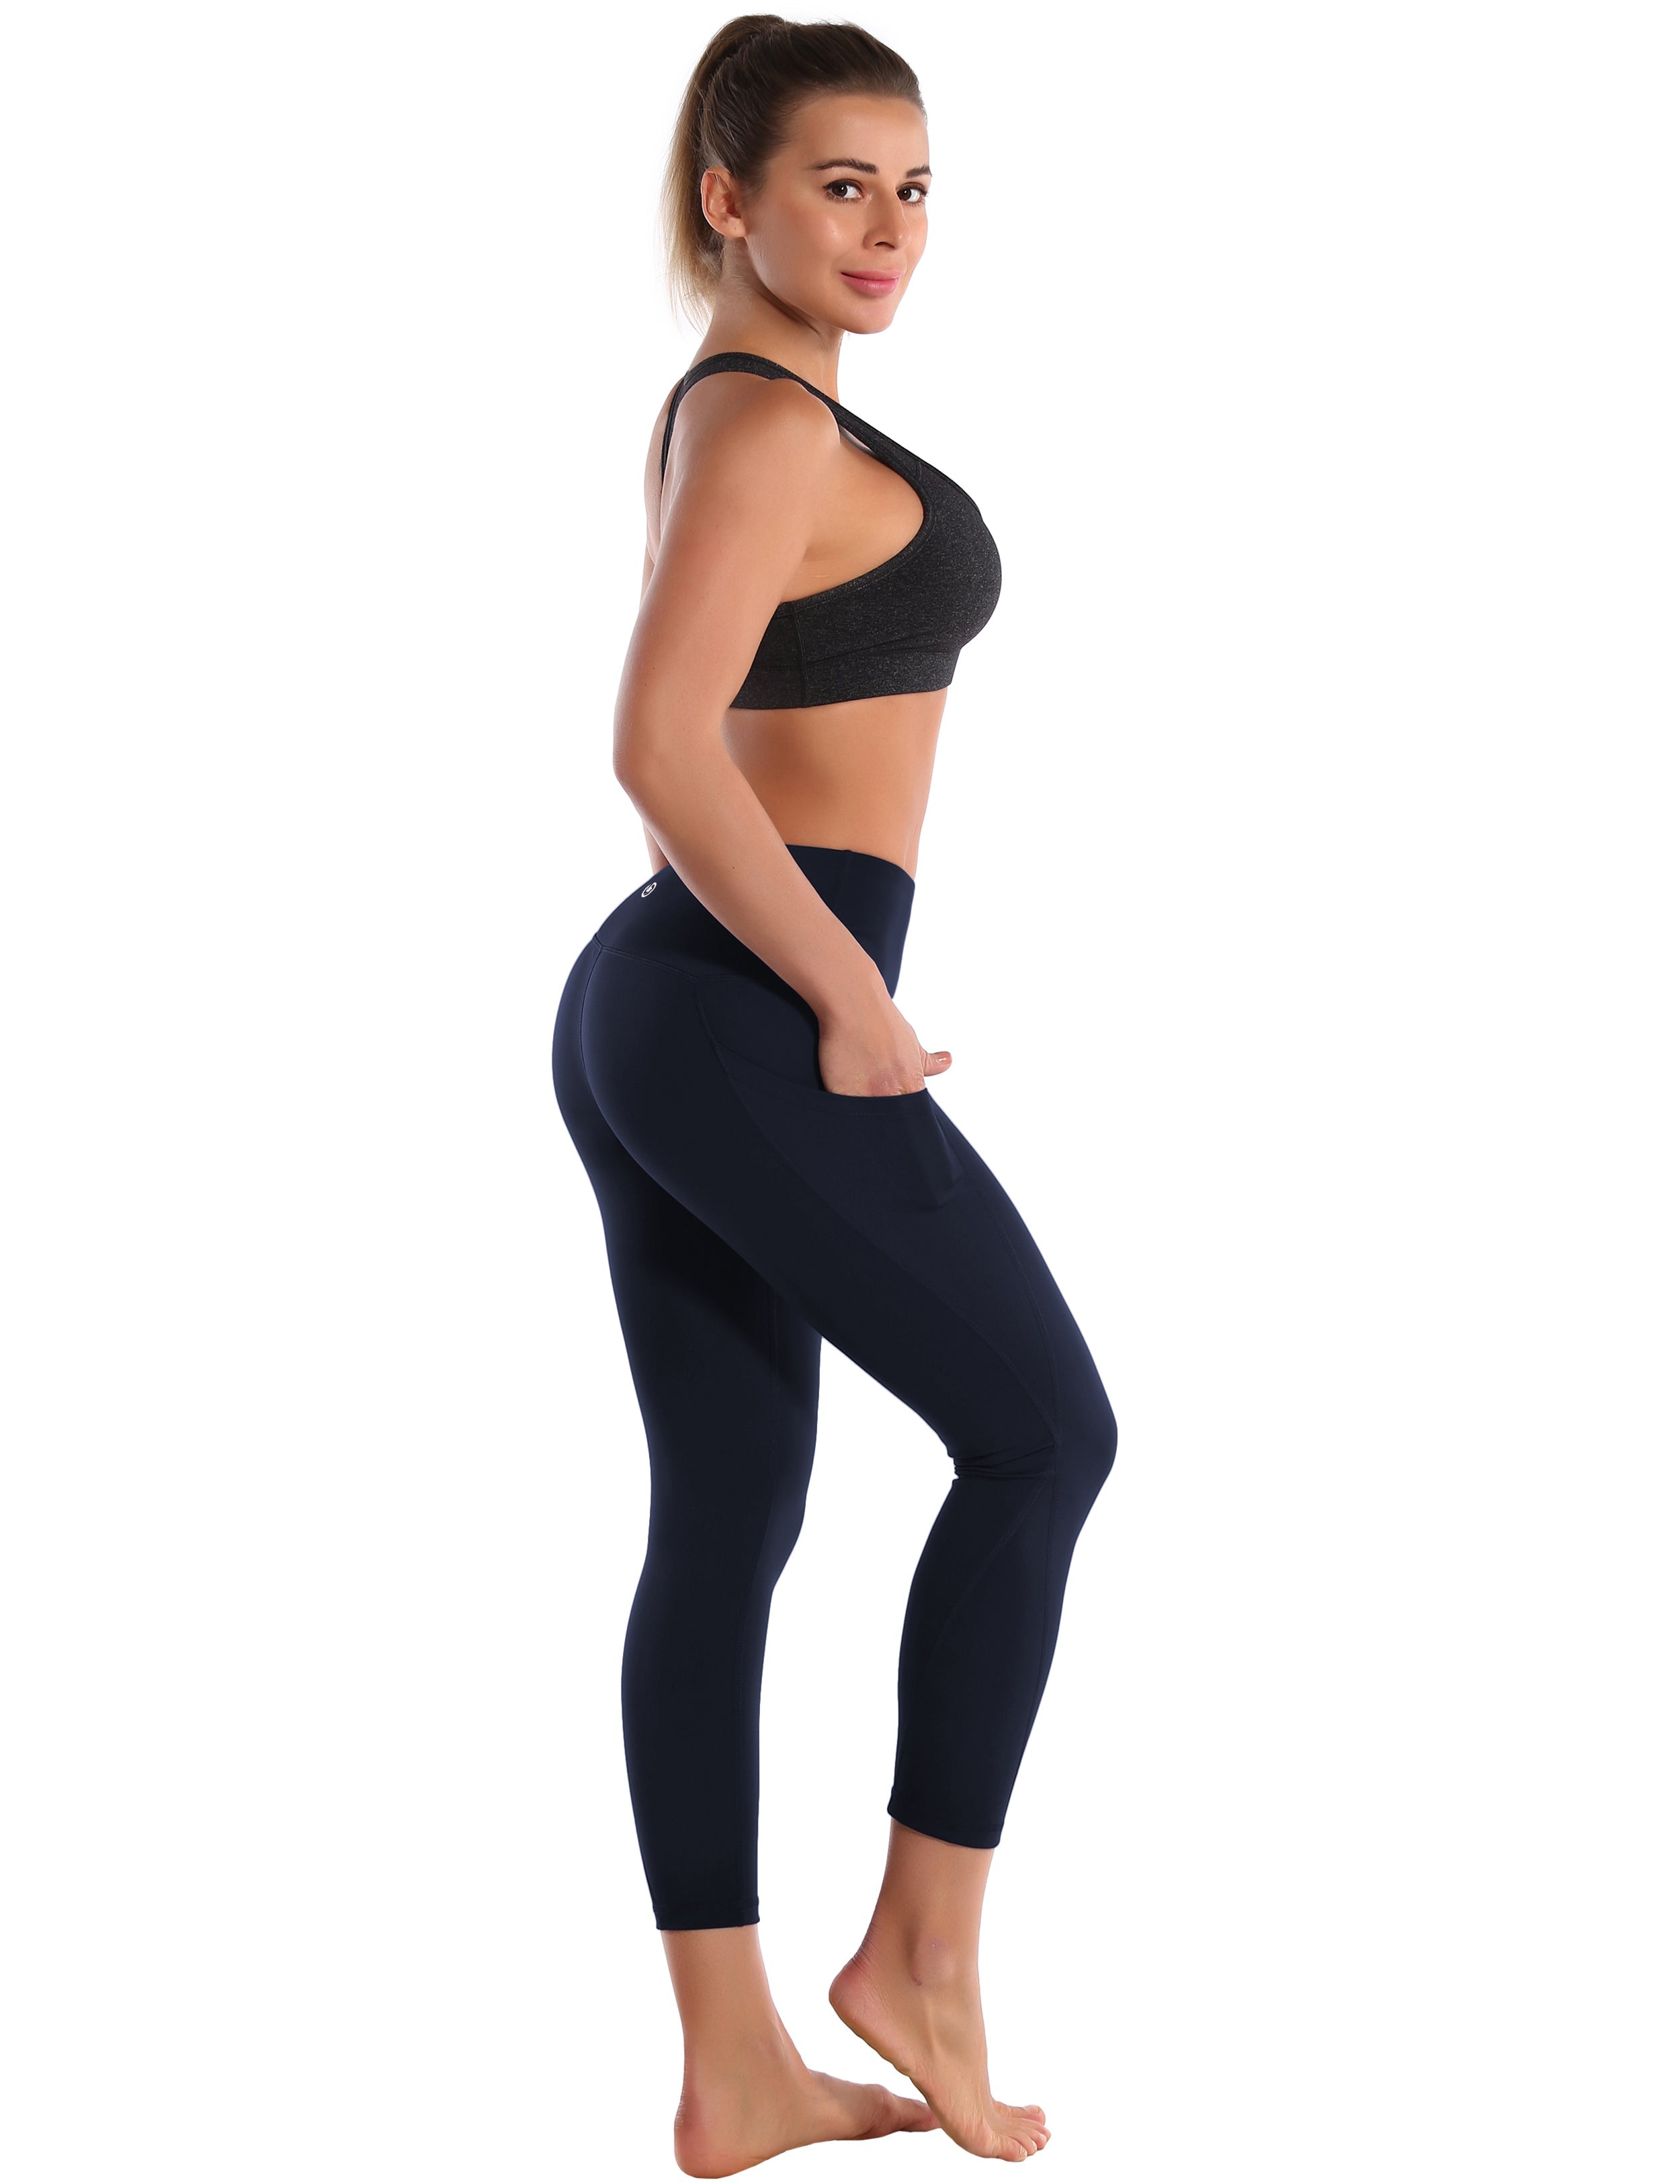 22" High Waist Side Pockets Capris darknavy 75%Nylon/25%Spandex Fabric doesn't attract lint easily 4-way stretch No see-through Moisture-wicking Tummy control Inner pocket